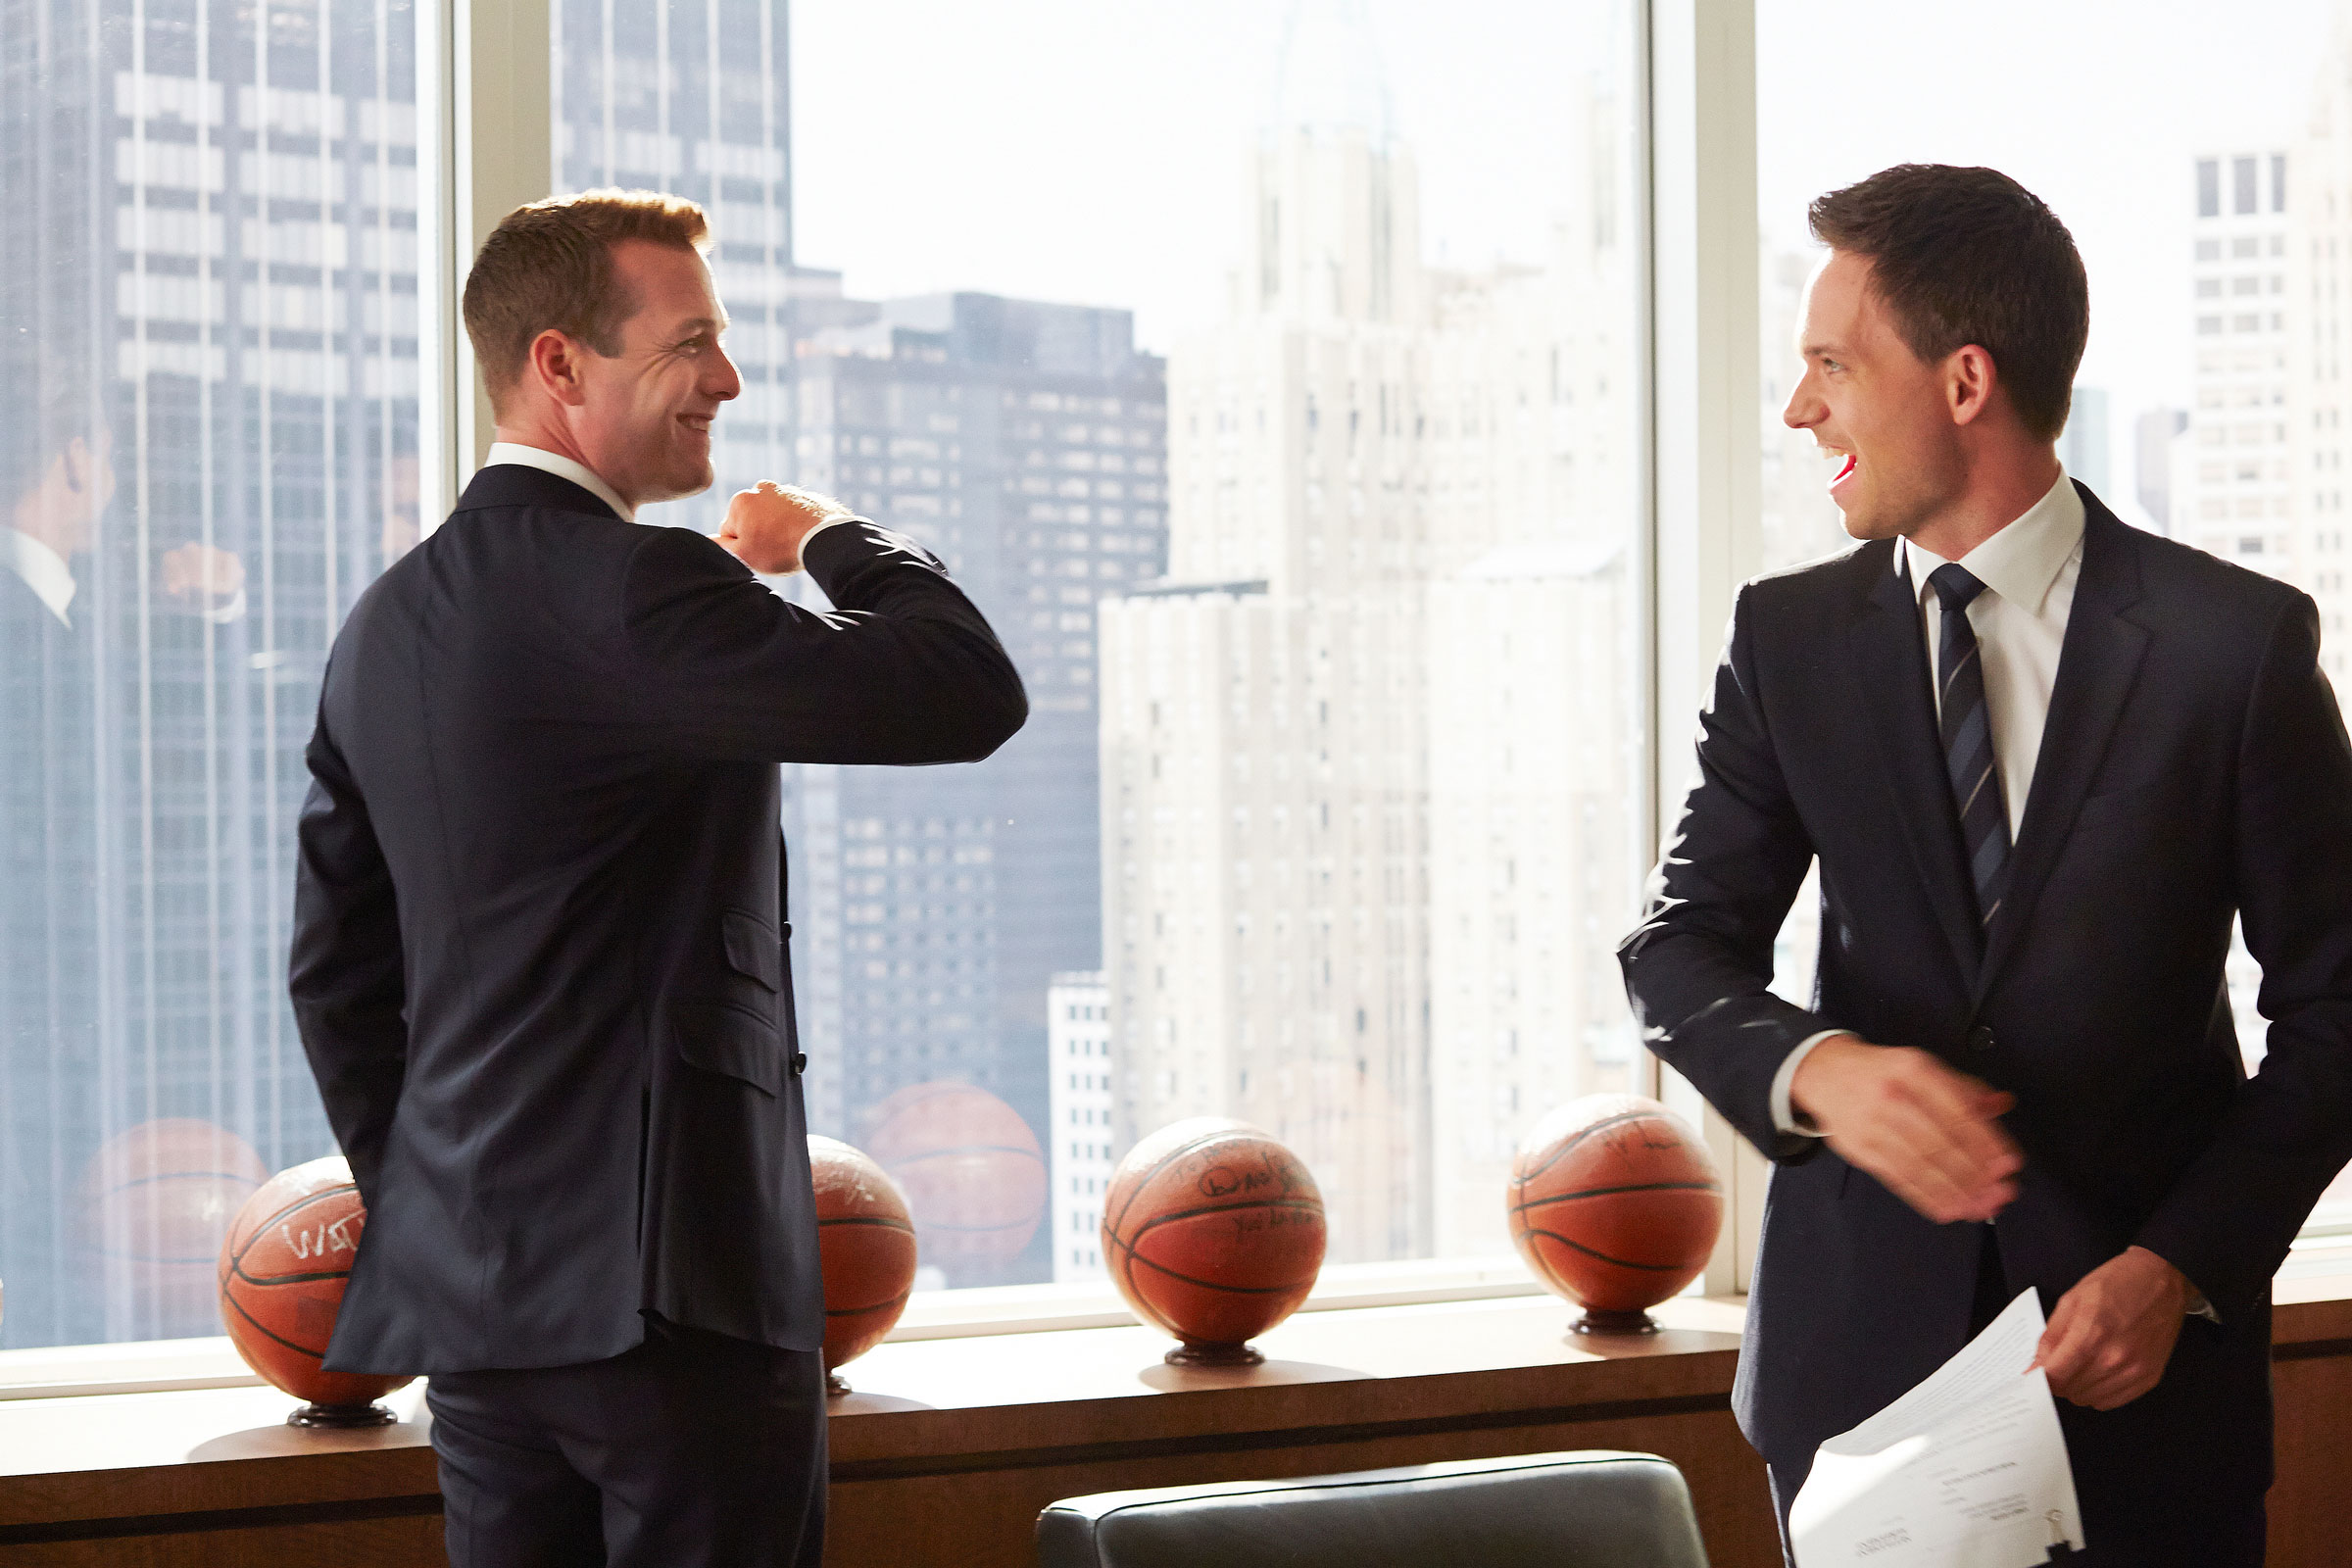 still from season 3 of Suits showing Gabriel Macht as Harvey Specter and Patrick J. Adams as Michael Ross